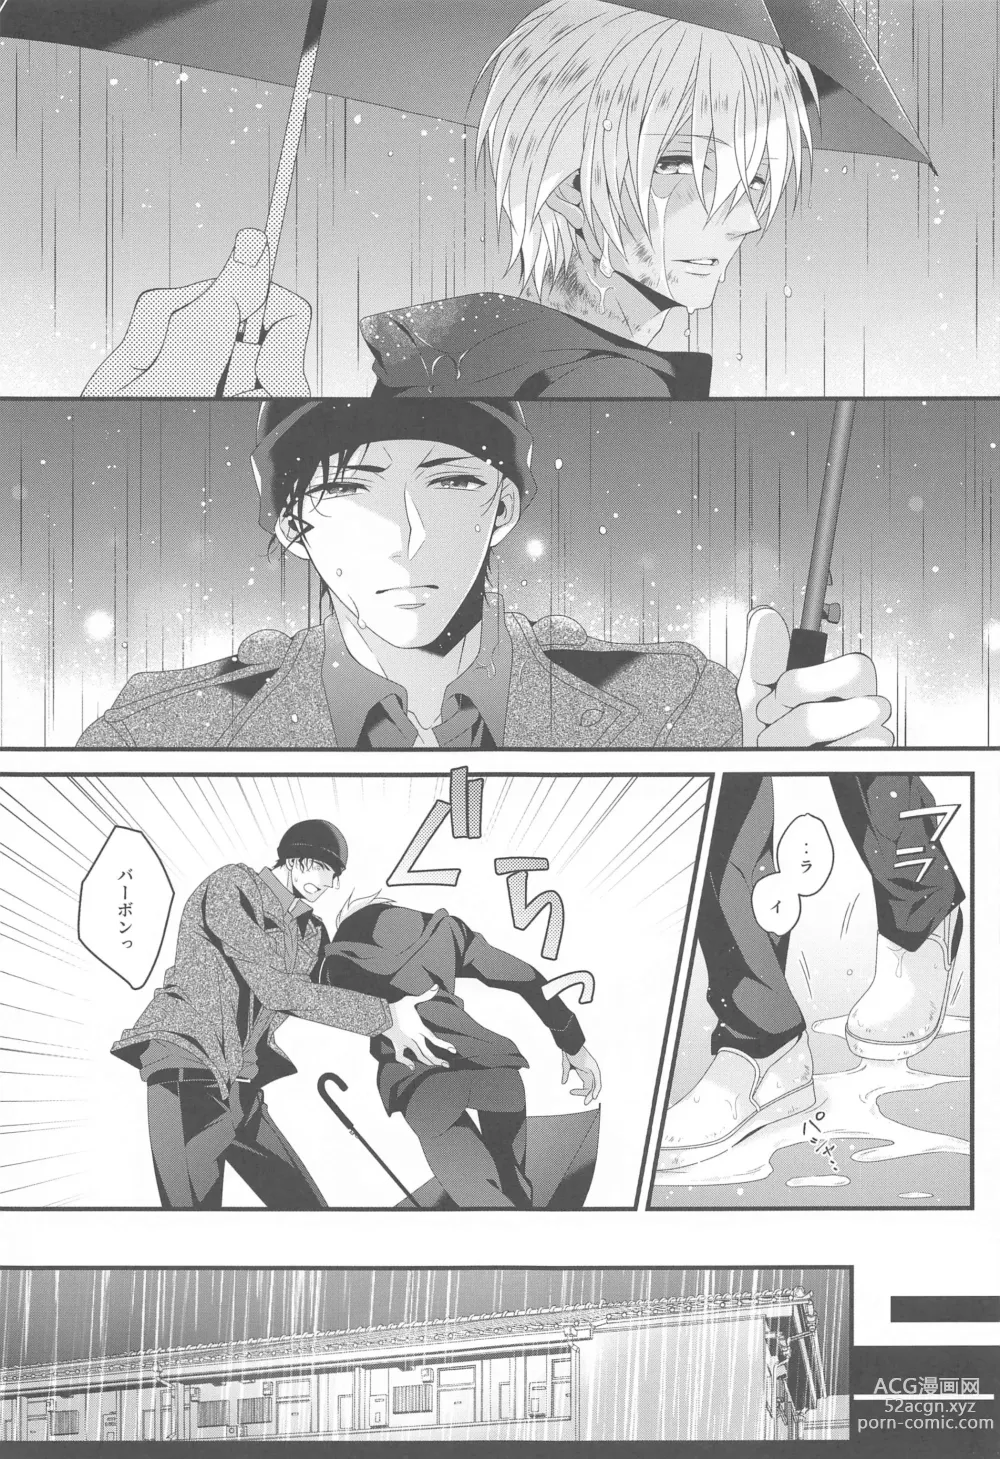 Page 6 of doujinshi Aibetsuriku no Yosame - A rainy night the pain of separation from loved ones